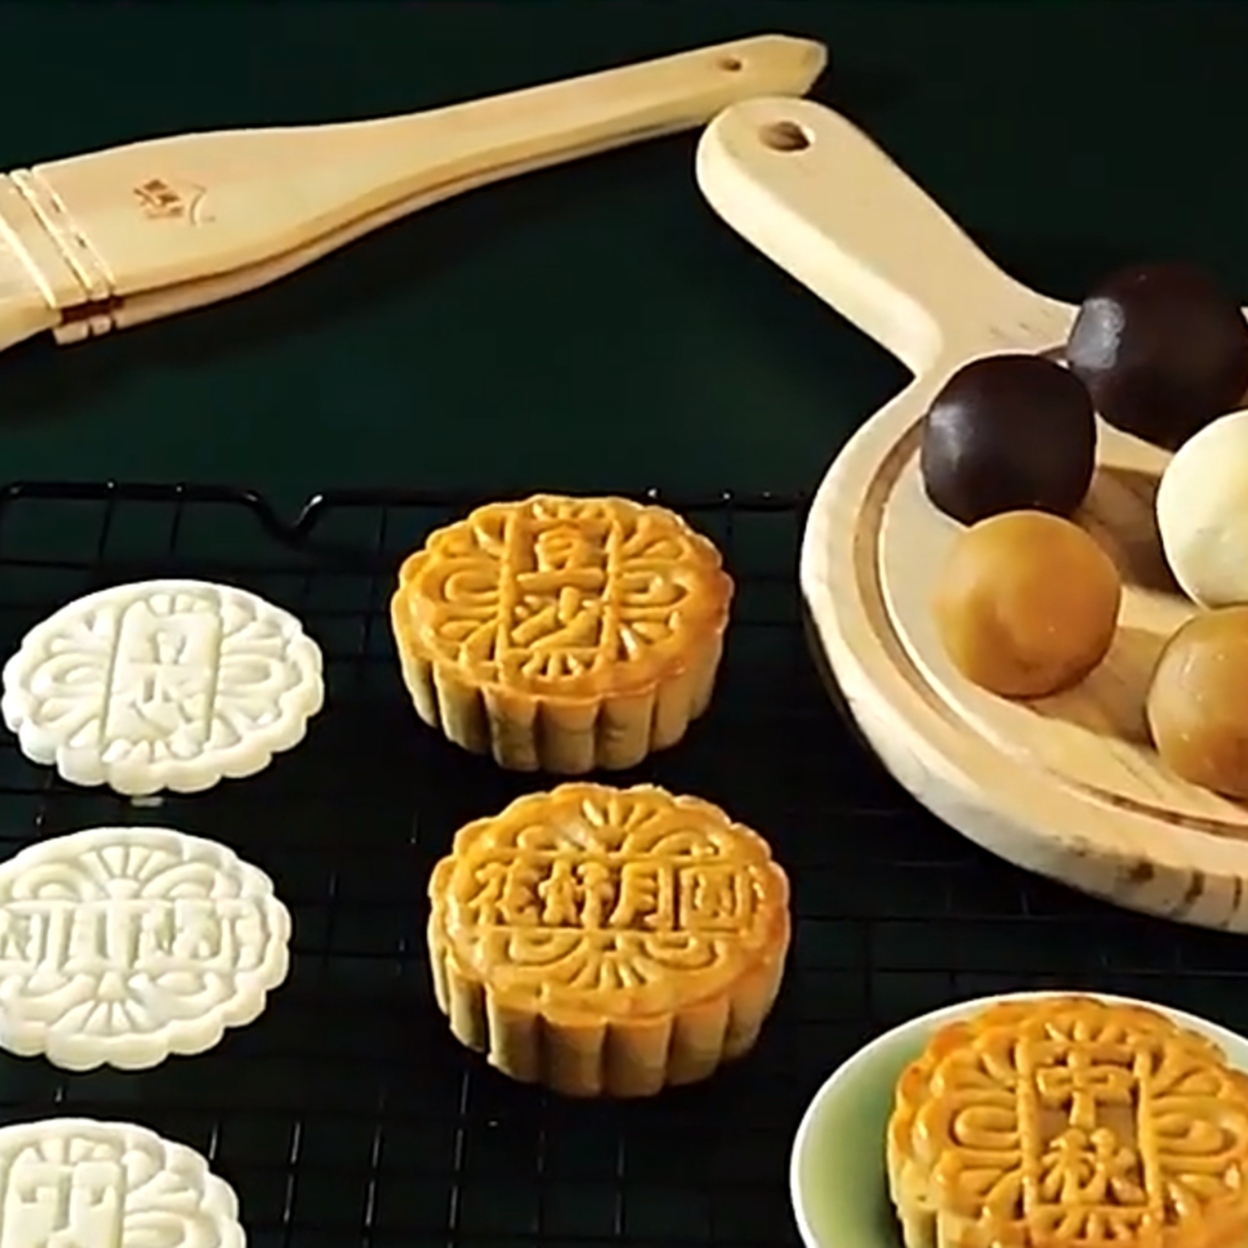 1 Set Mooncake Mold Round Shape Food Grade NonStick Making Pastries Chinese  Character Cake Press Mold Bakery Supplies - no - Bed Bath & Beyond -  36975271